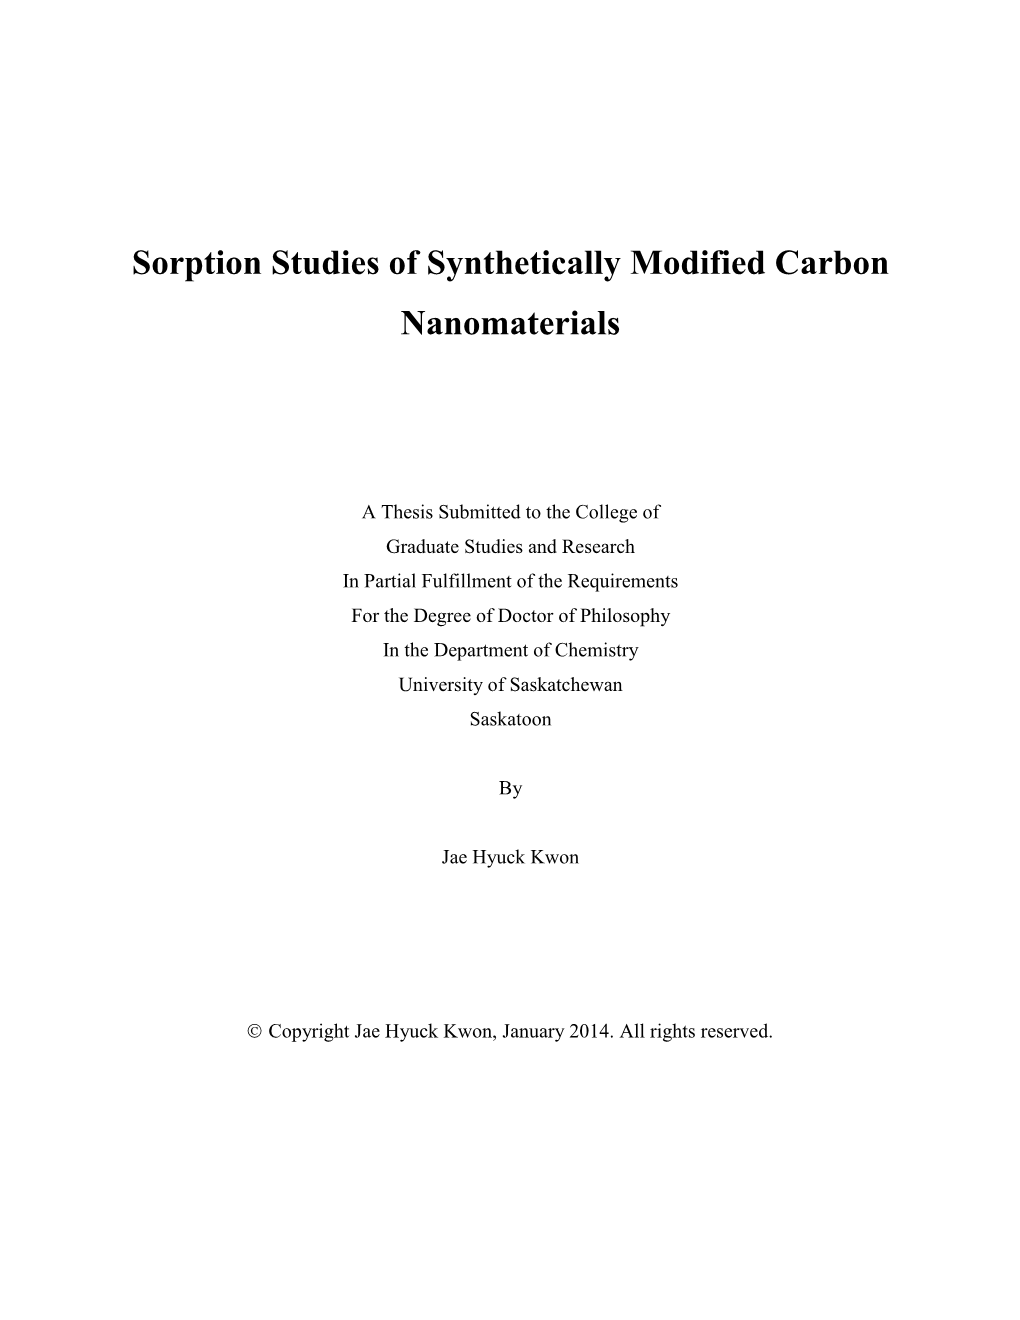 Sorption Studies of Synthetically Modified Carbon Nanomaterials